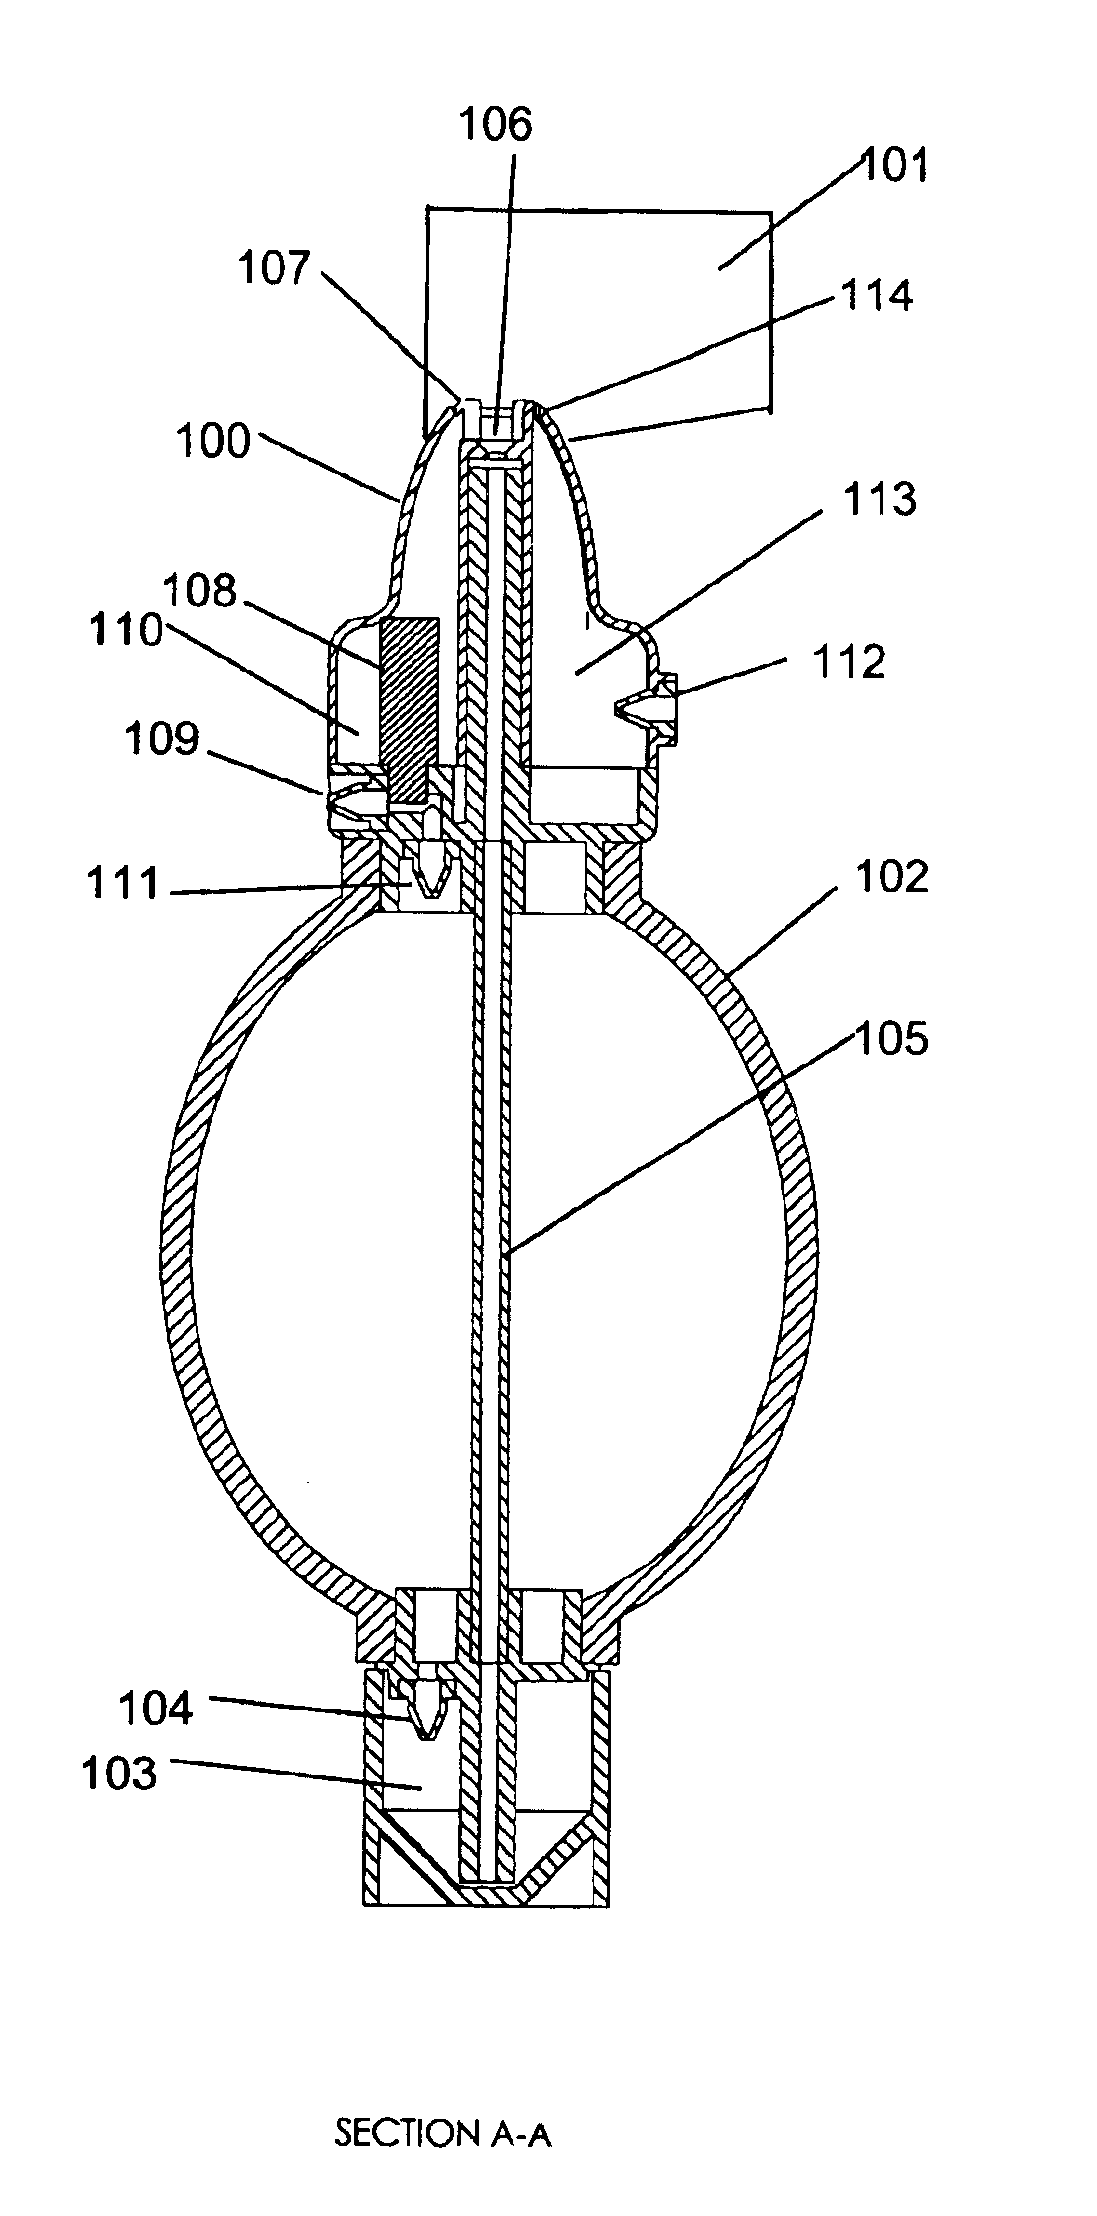 Agent delivery and aspiration device